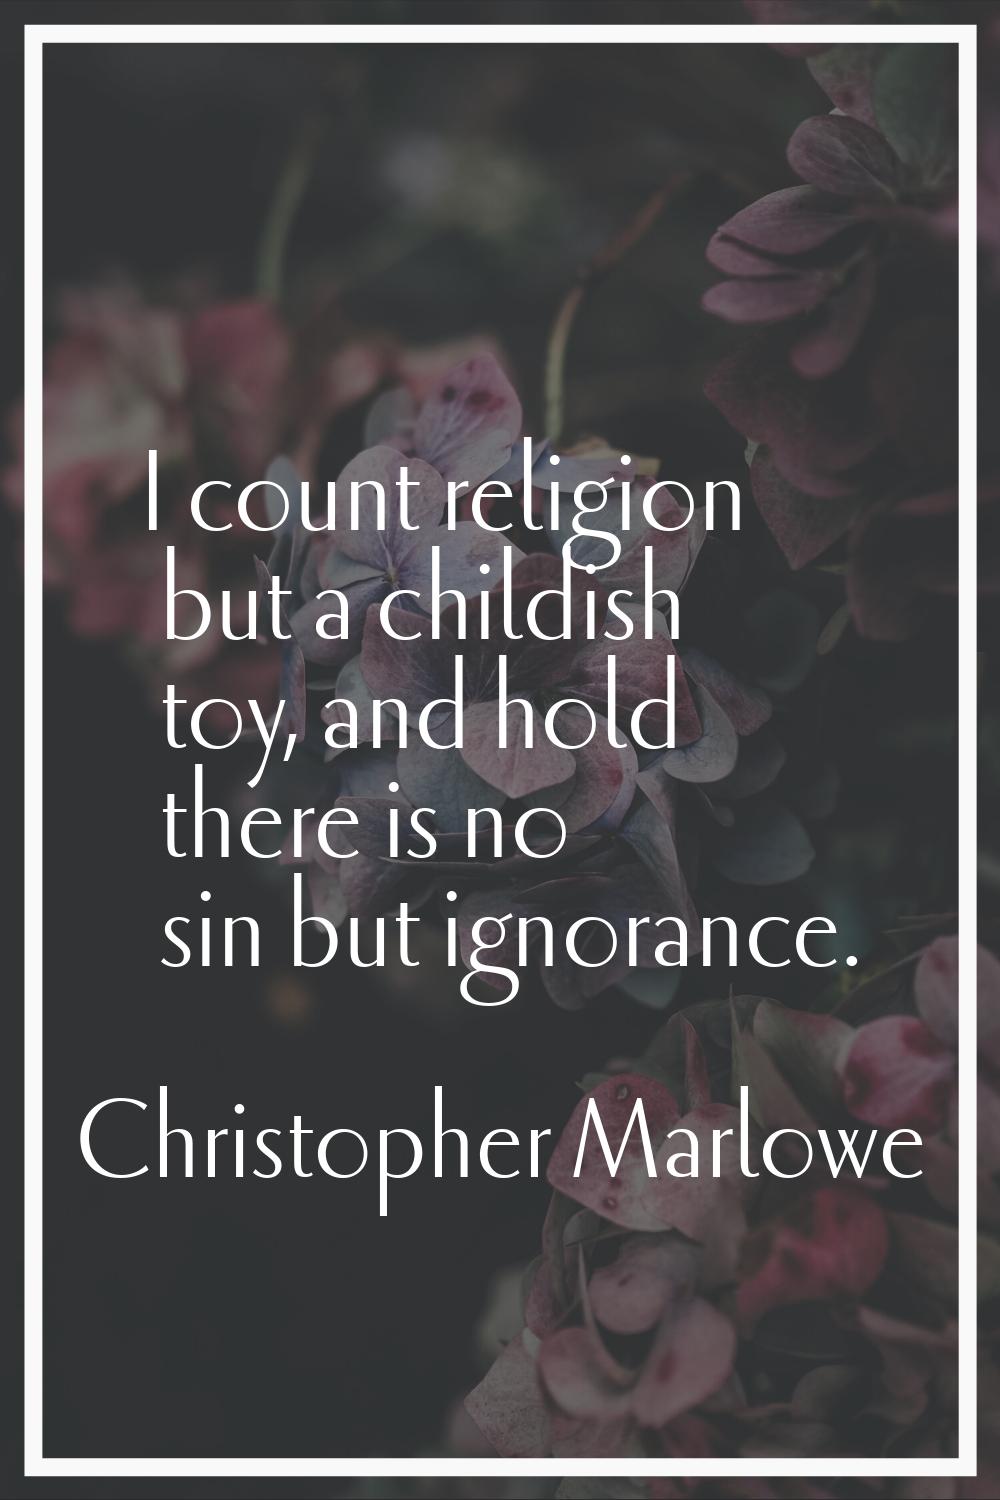 I count religion but a childish toy, and hold there is no sin but ignorance.